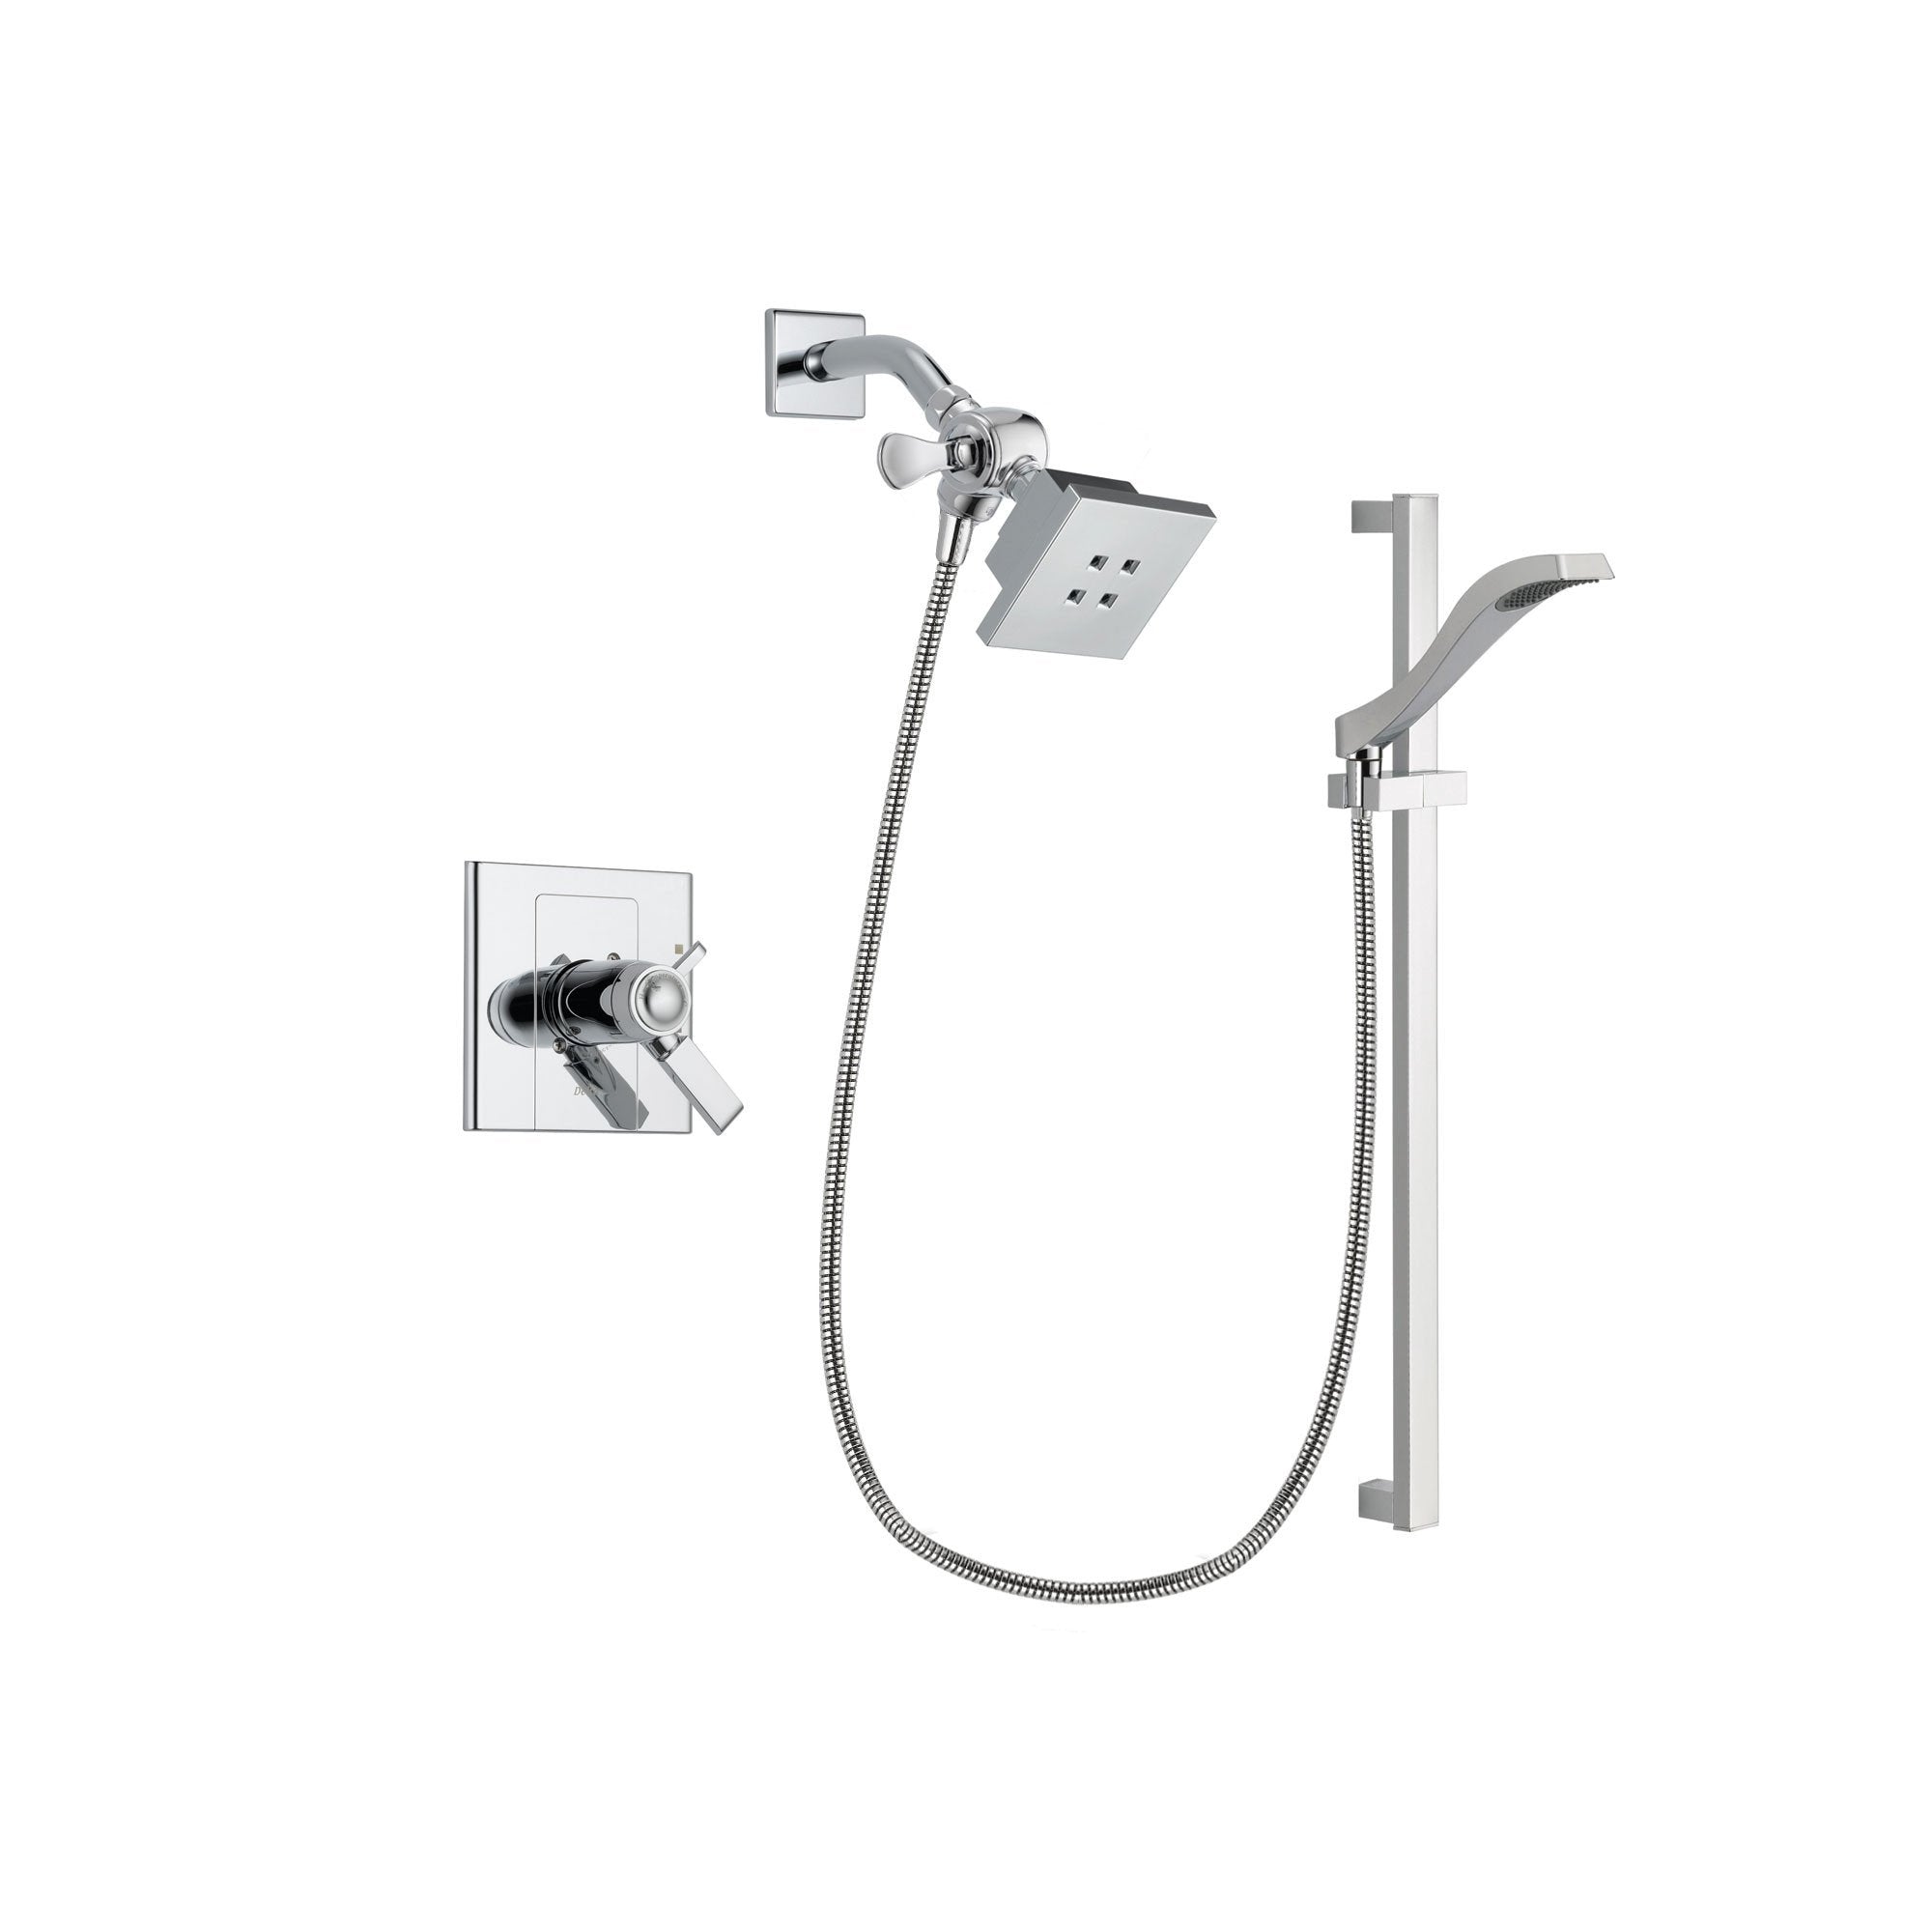 Delta Arzo Chrome Finish Thermostatic Shower Faucet System Package with Square Showerhead and Wall Mount Slide Bar with Handheld Shower Spray Includes Rough-in Valve DSP0149V